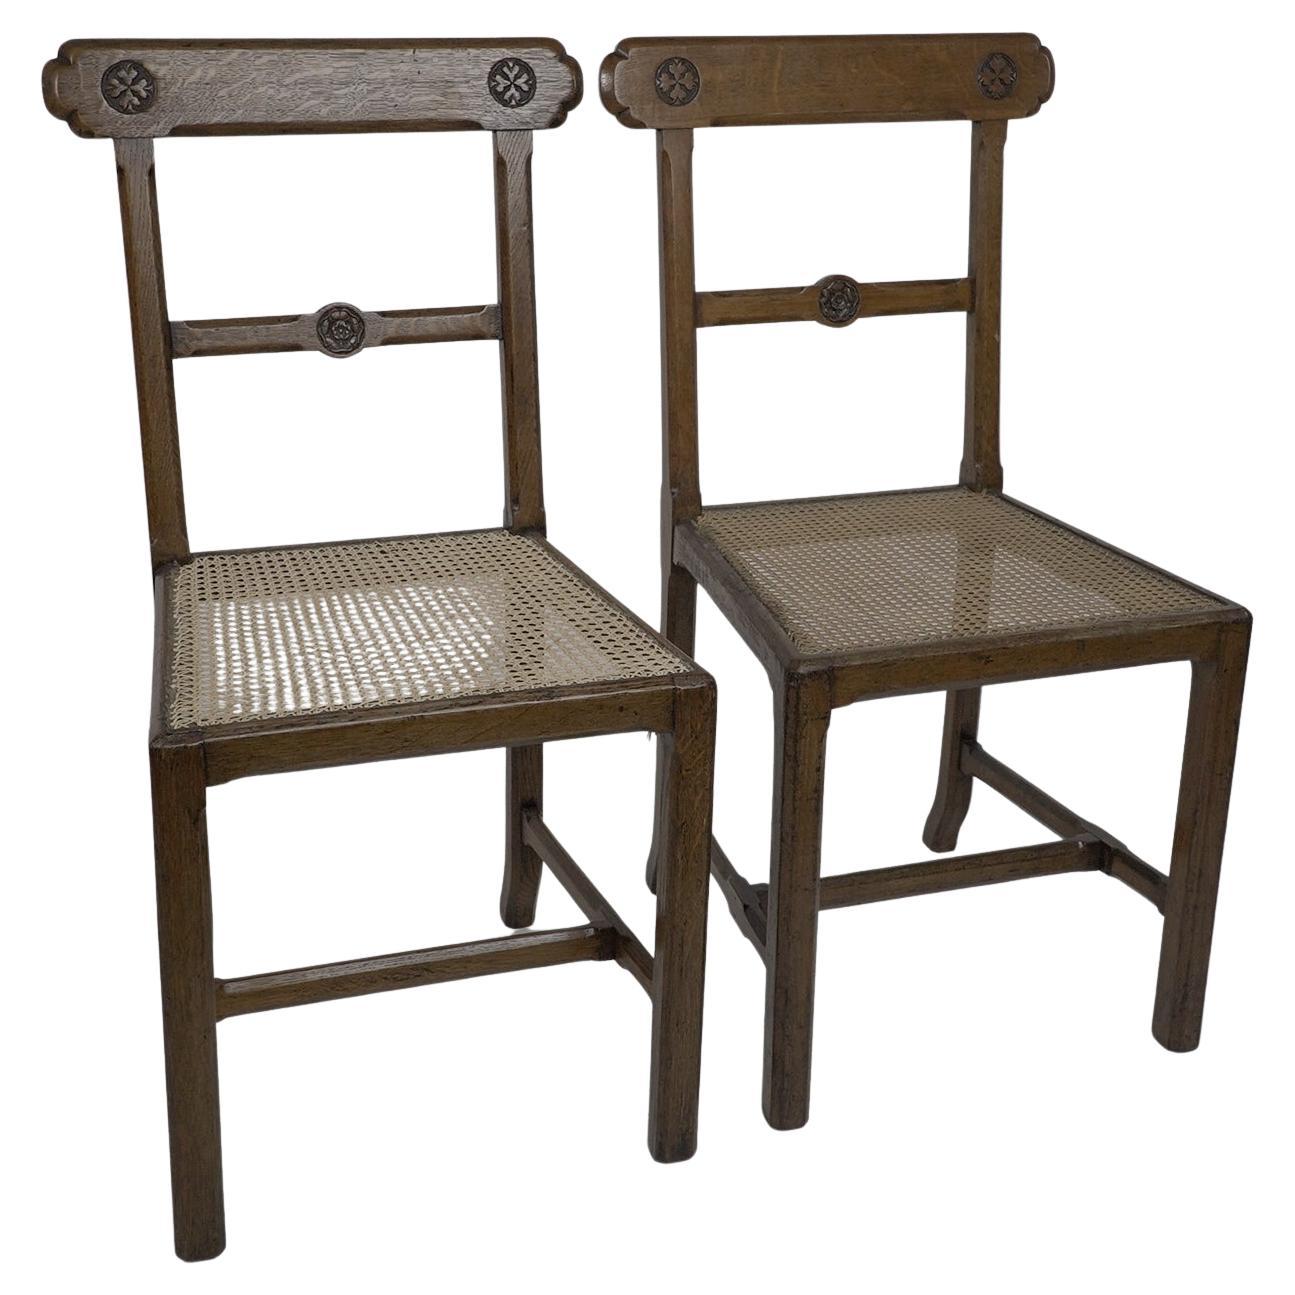 J.G.Crace attributed. In the style of AWN Pugin. A pair of Gothic Revival chairs For Sale